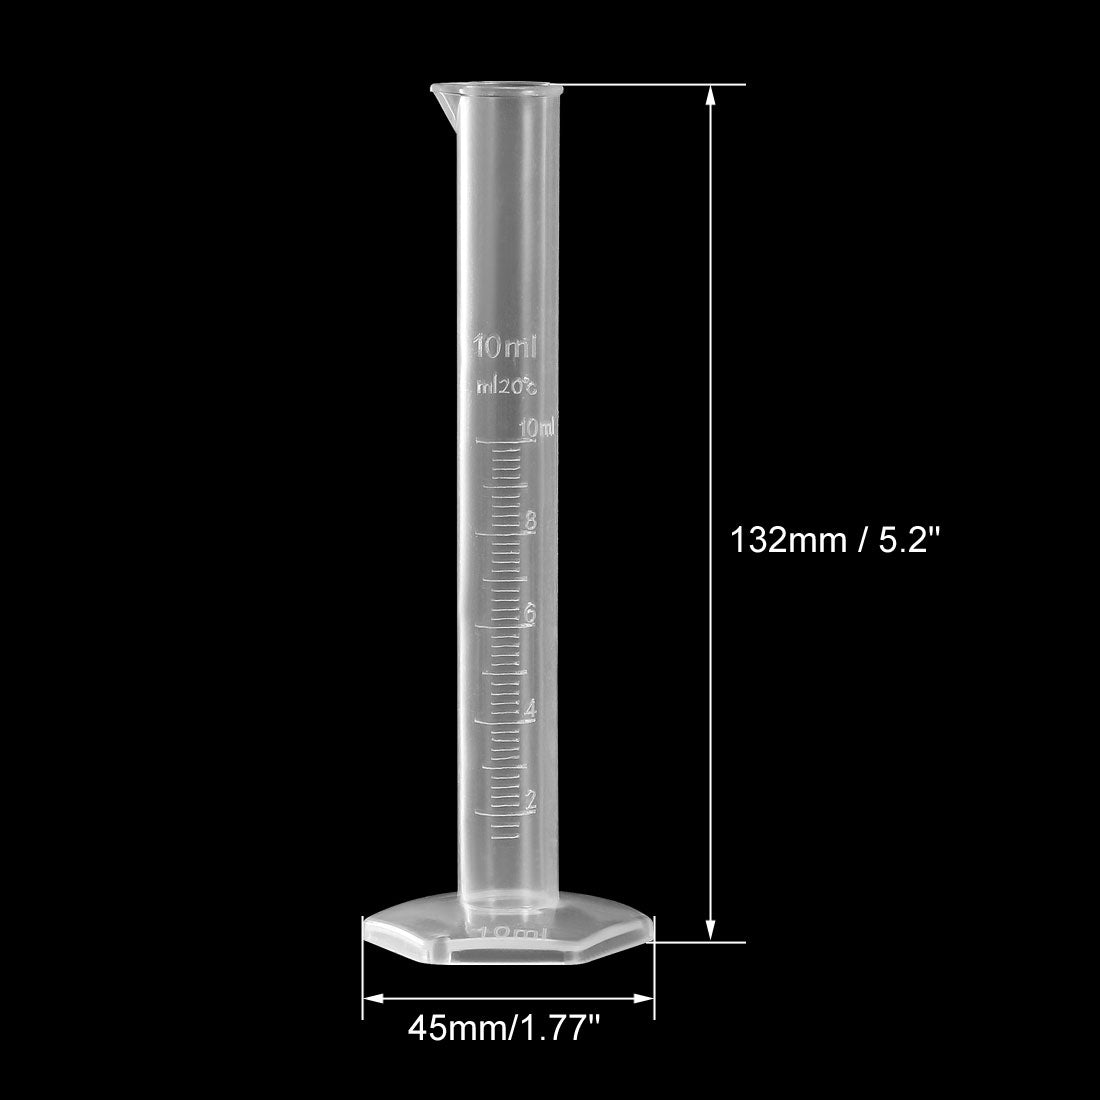 uxcell Uxcell 10ml Laboratory Measurements Clear White Plastic Hex Base Graduated Cylinder for Chemical Measuring